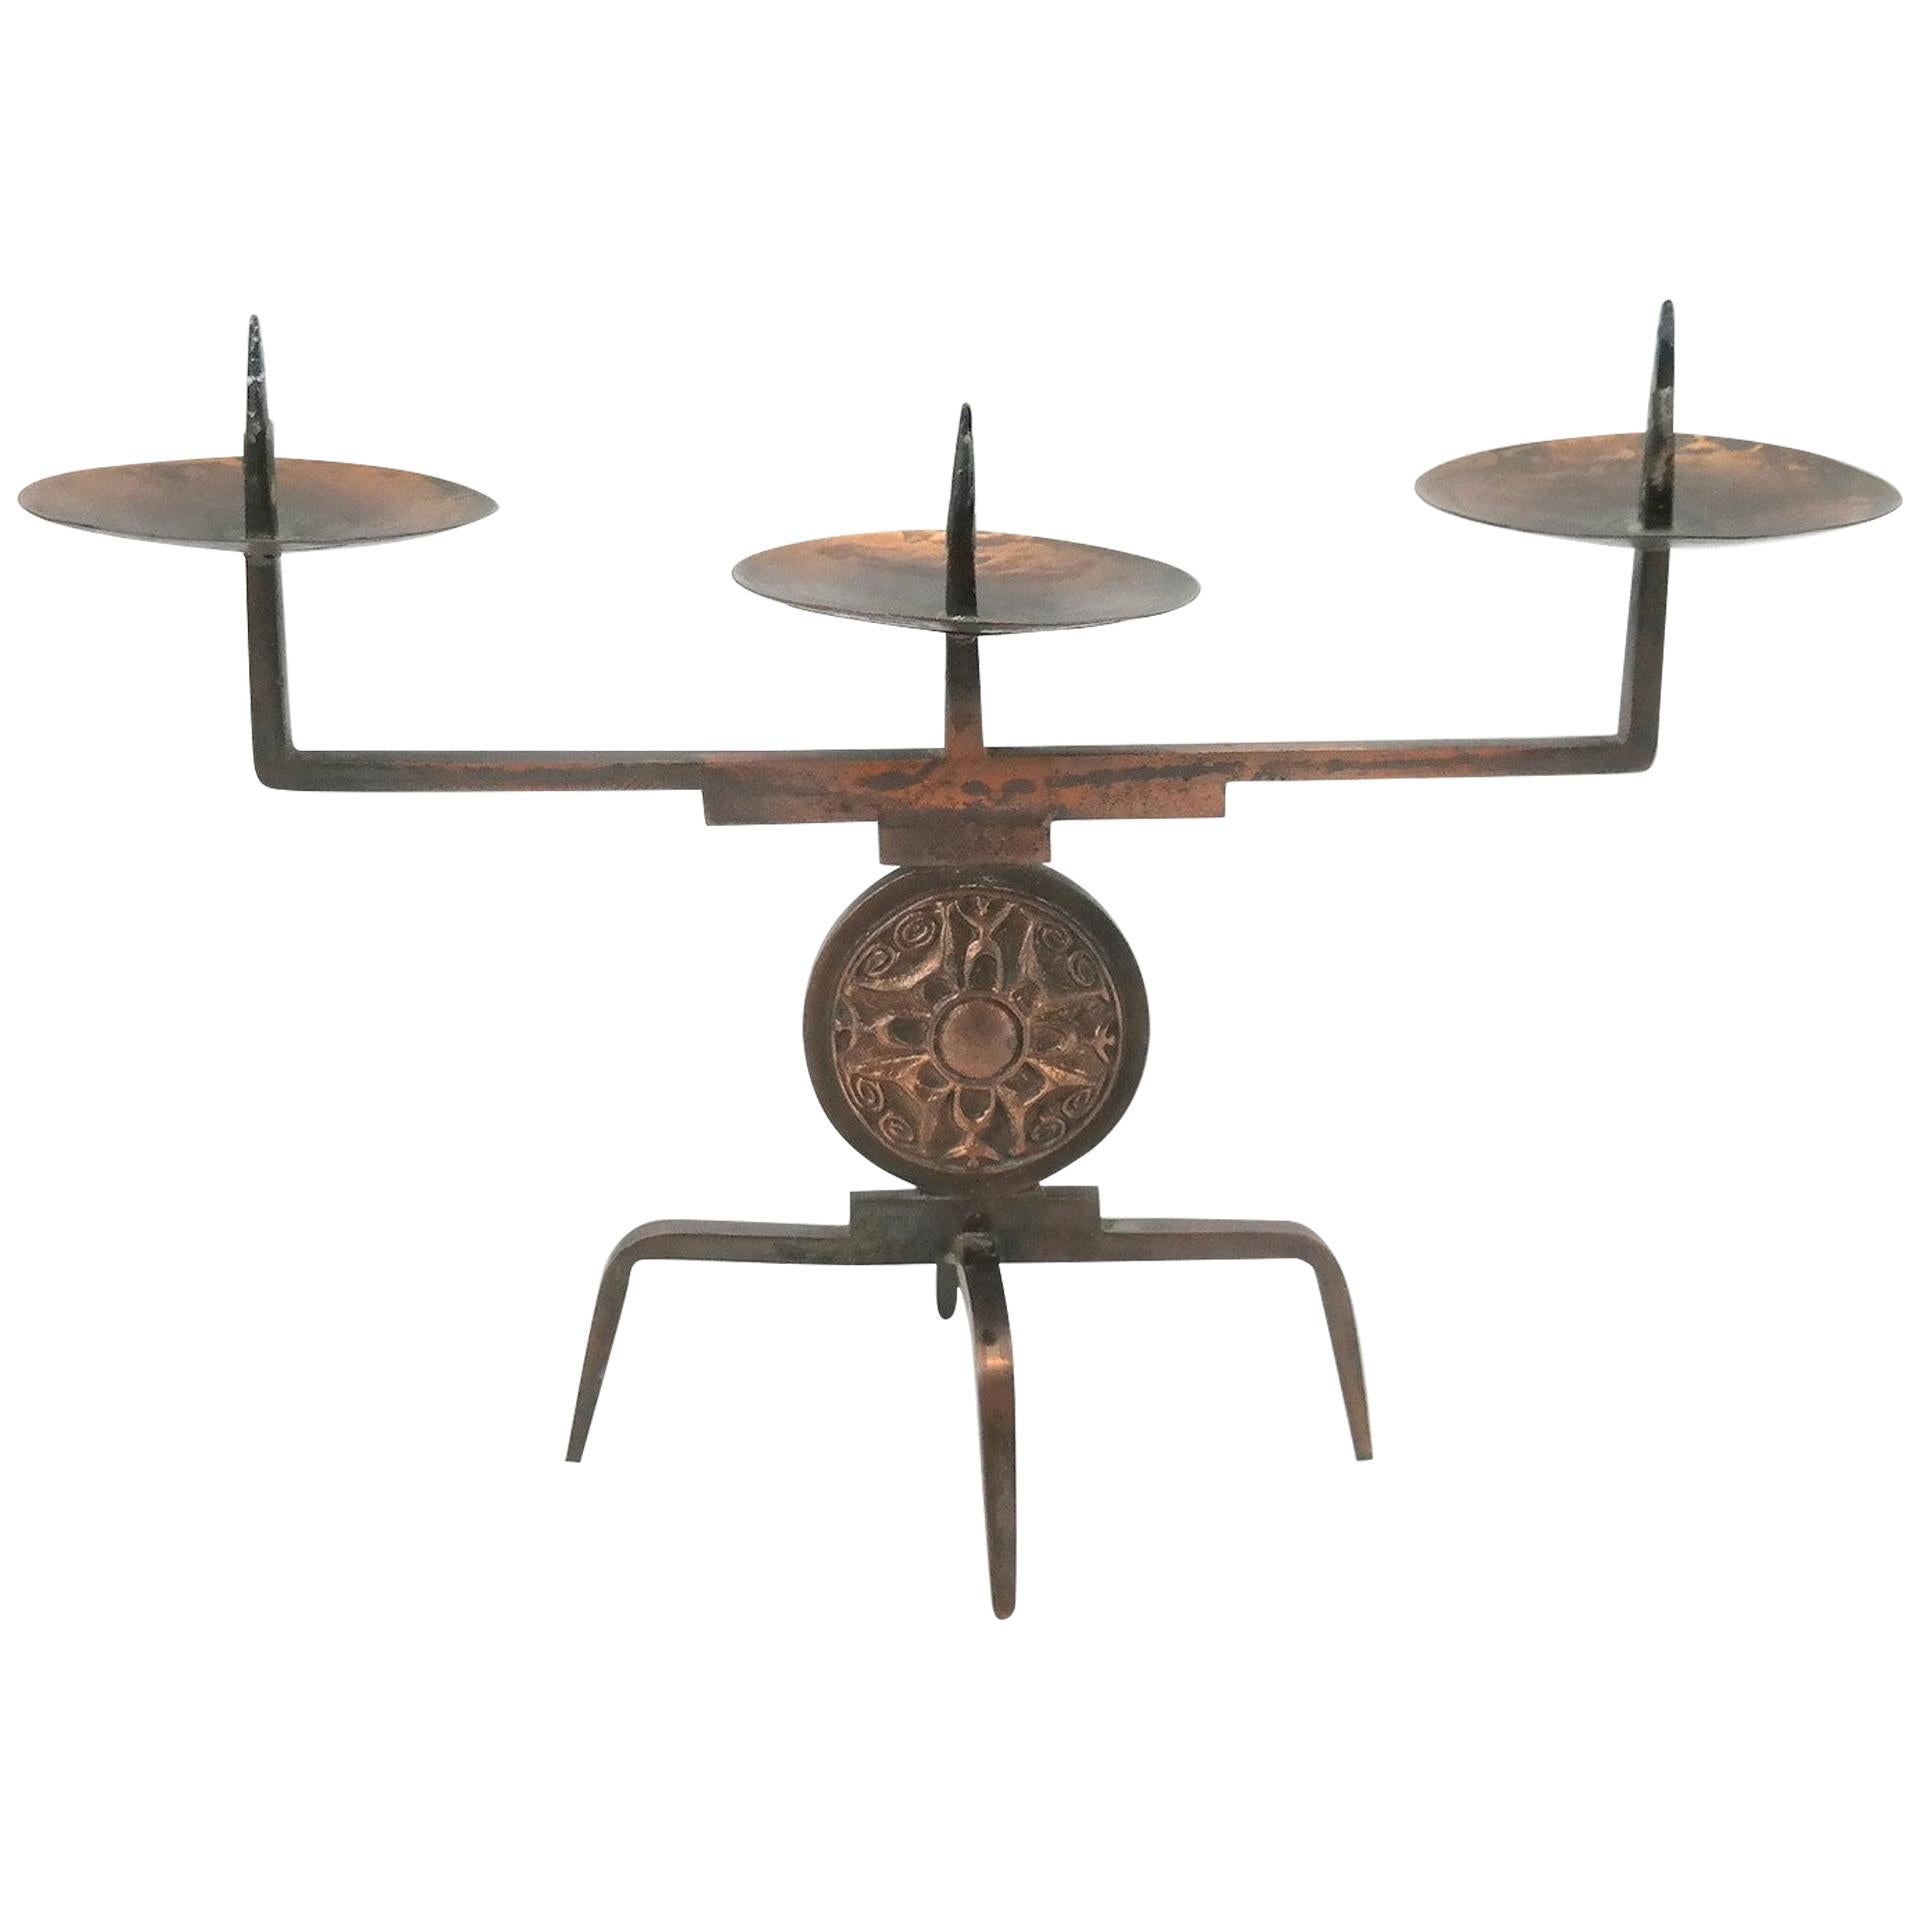 Midcentury Copper Candleholder by Gyula Szabo, 1970s For Sale